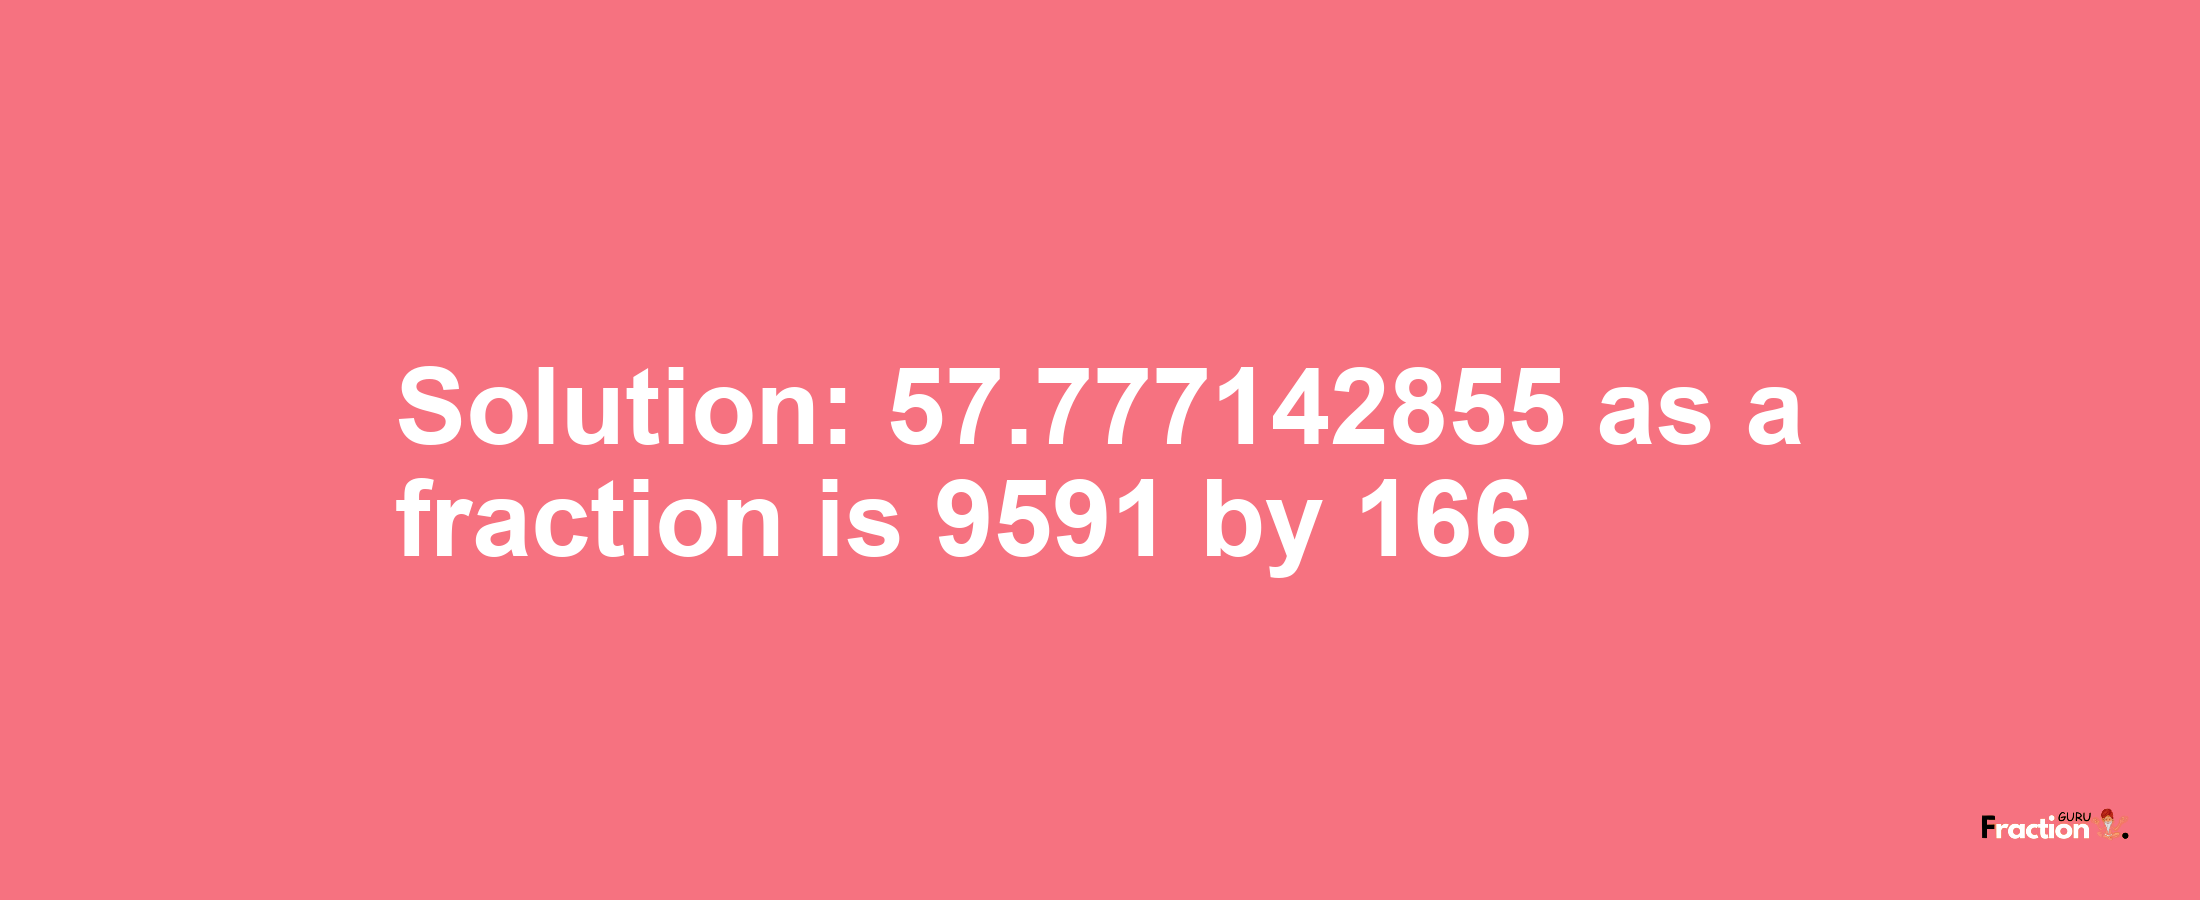 Solution:57.777142855 as a fraction is 9591/166